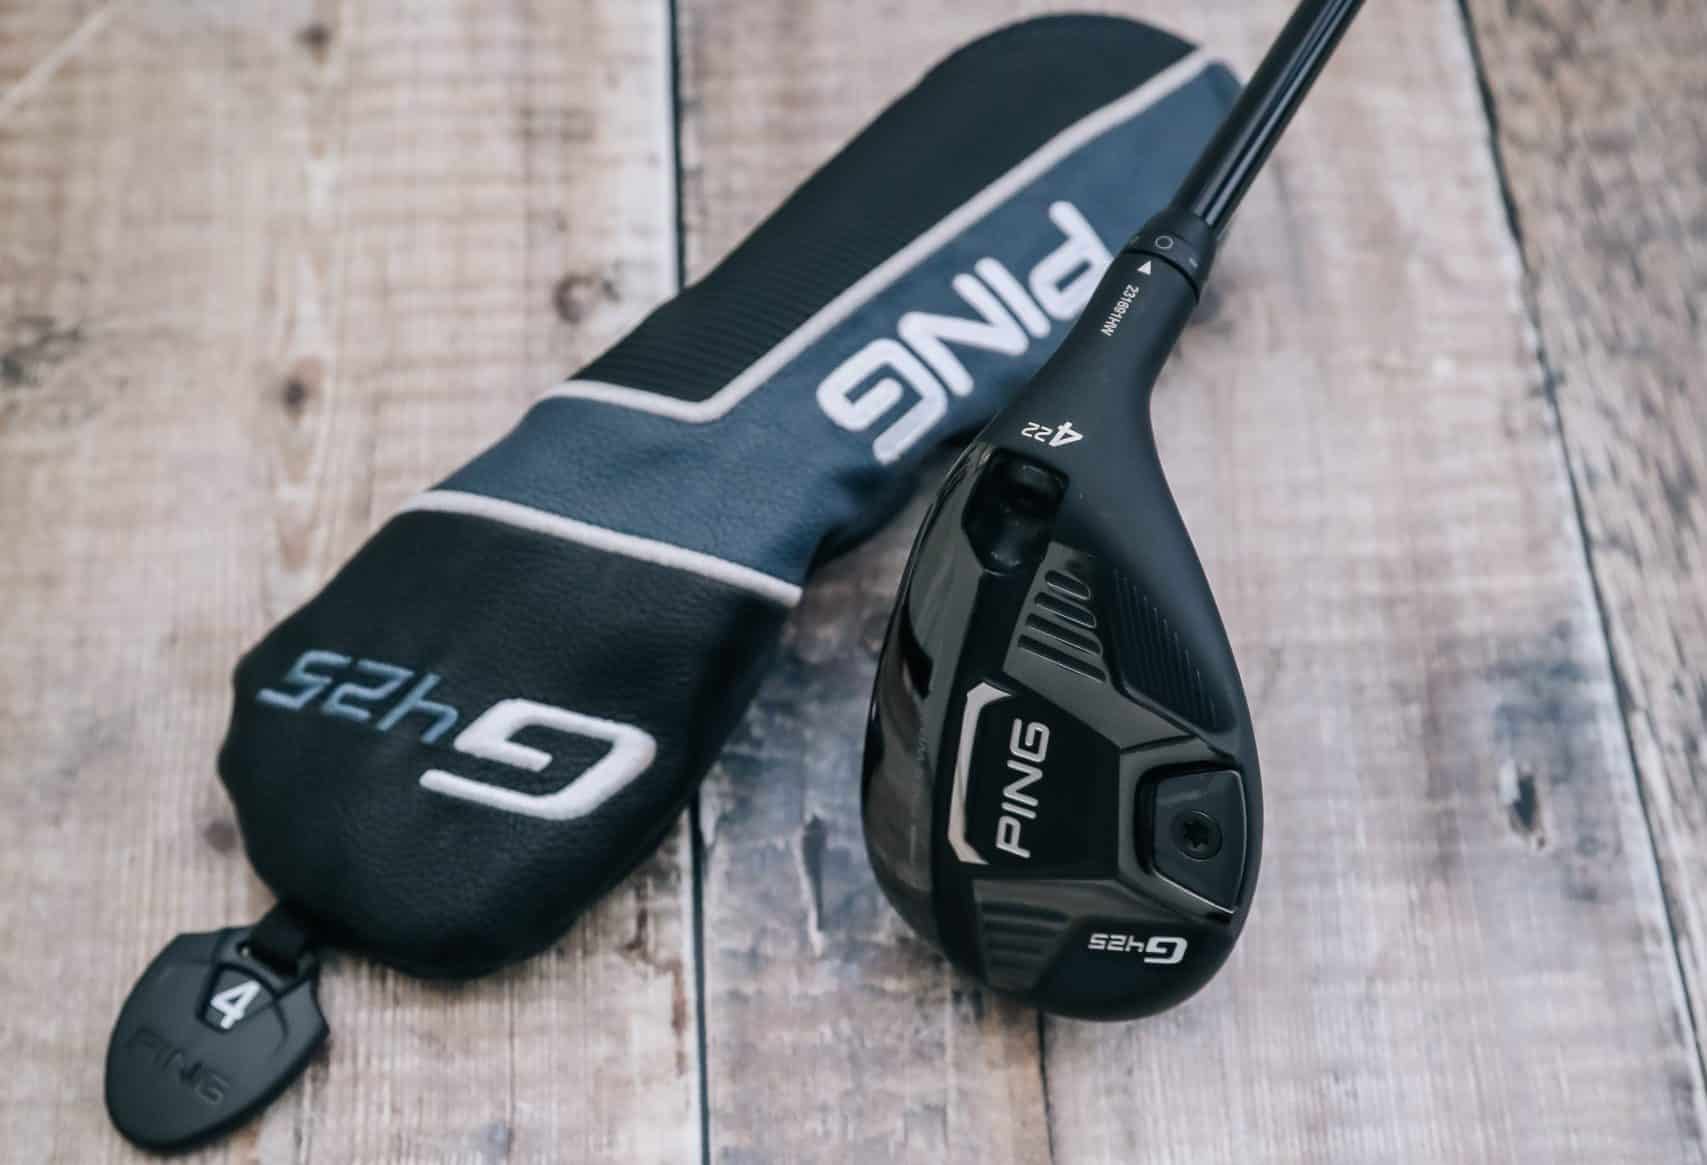 PING G425 Hybrid Gapping your long irons has never been easier